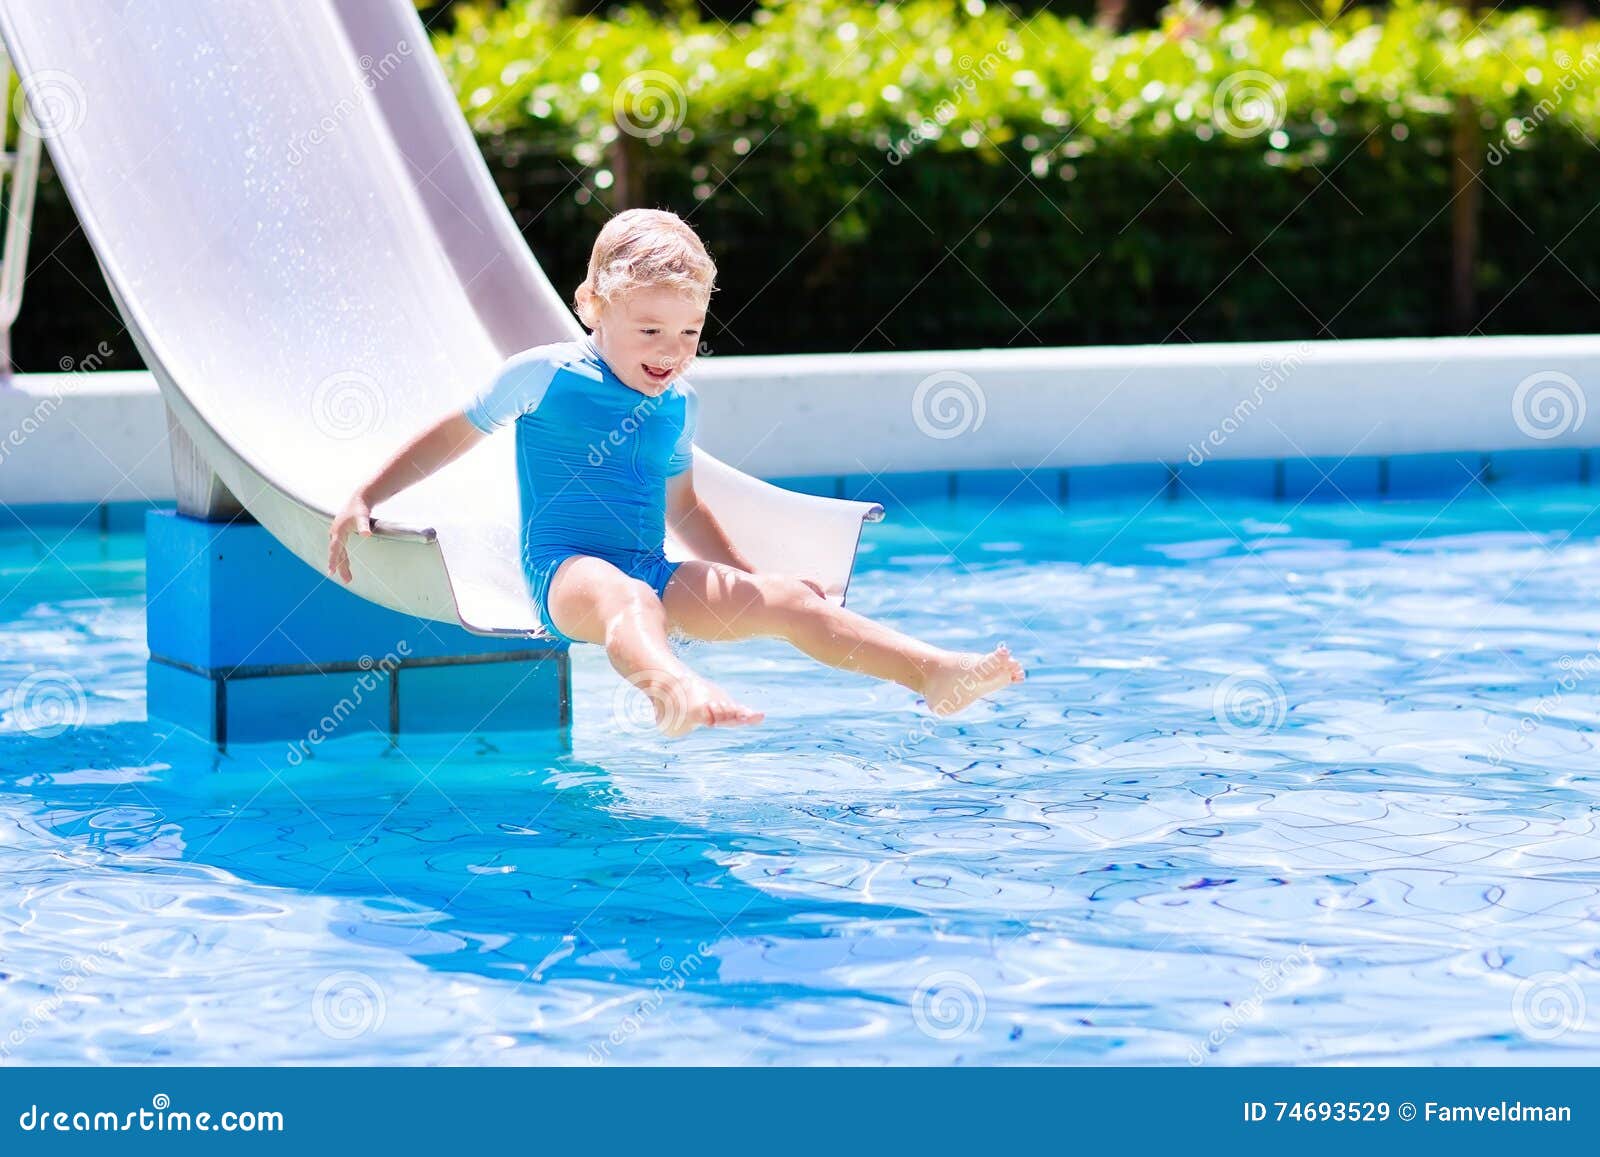 Download Little Child On Water Slide In Swimming Pool Stock Image - Image of playing, exotic: 74693529